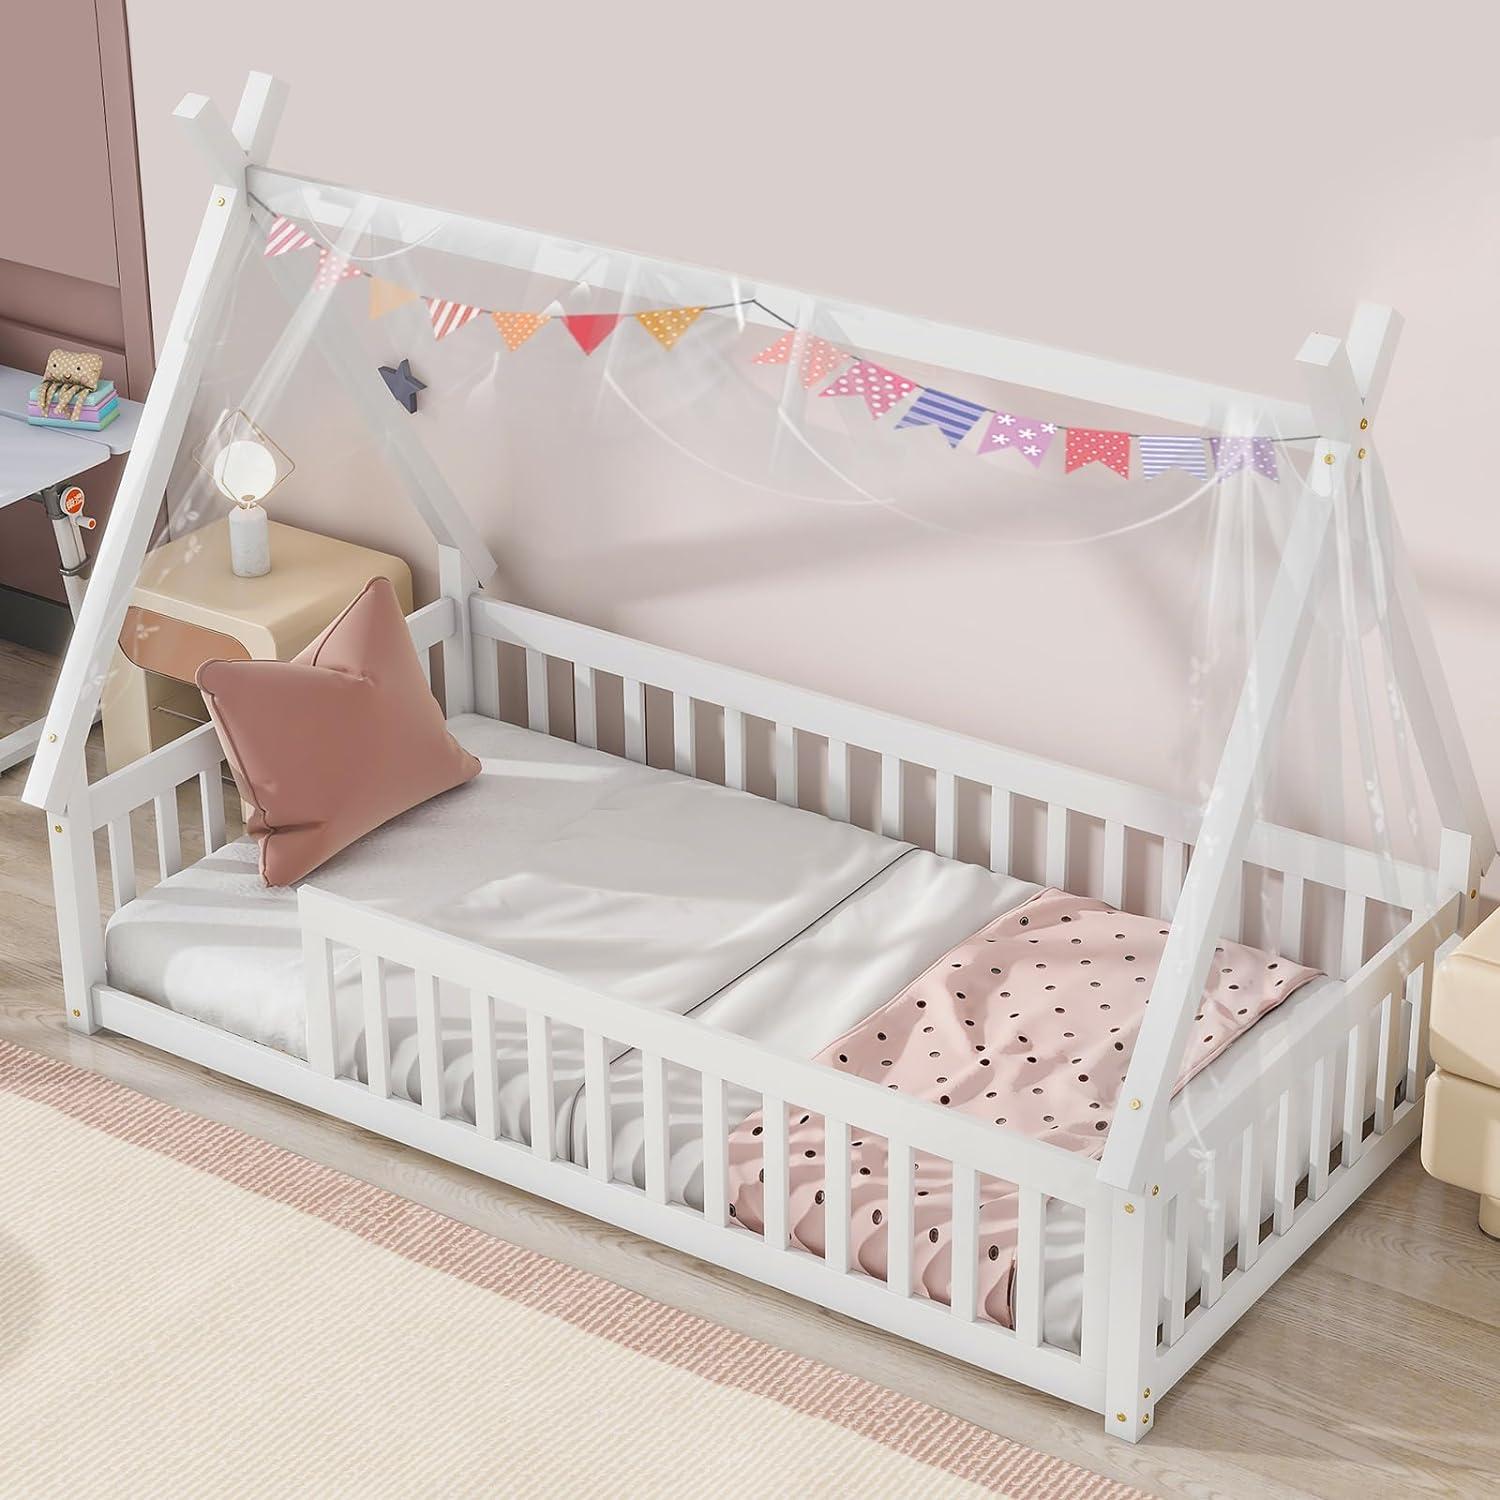 Montessori Tatub Twin Teepe Floor Bed Frame With Railings Without Door White